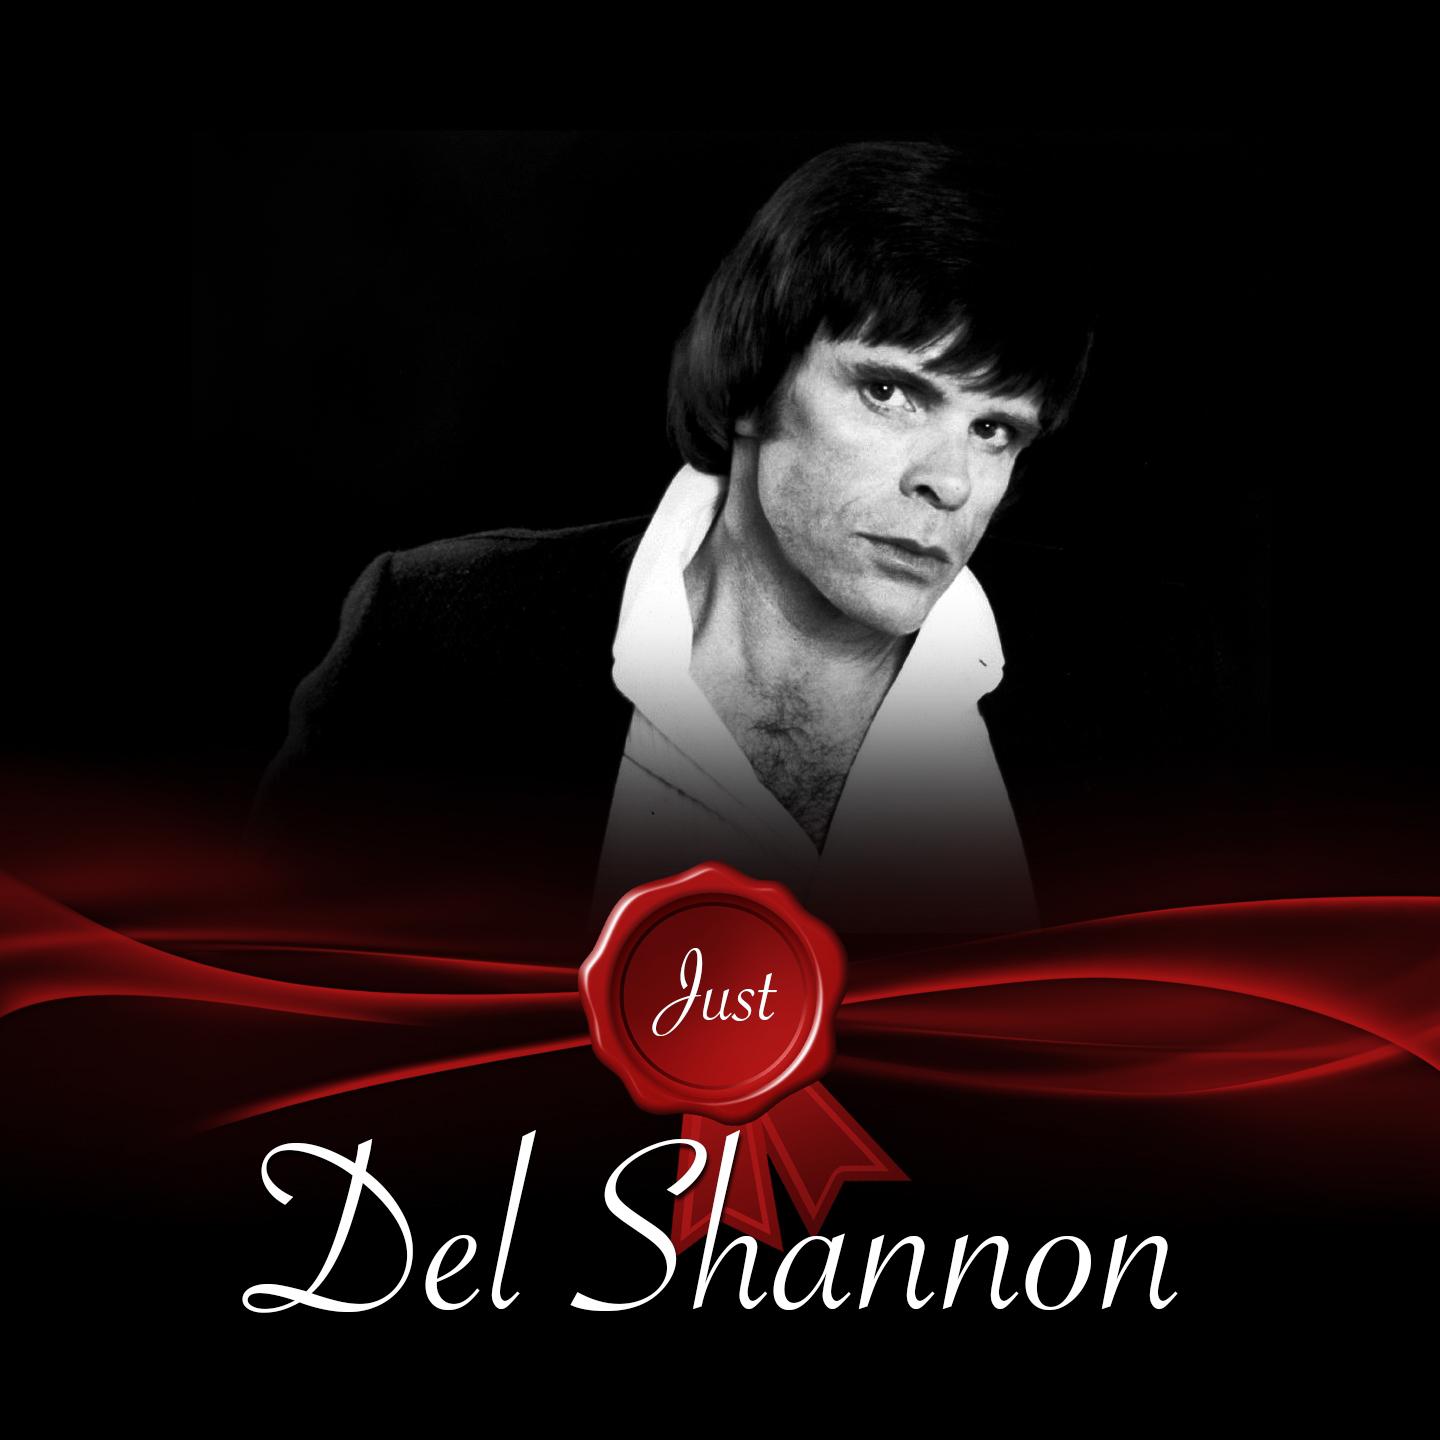 Just - Del Shannon